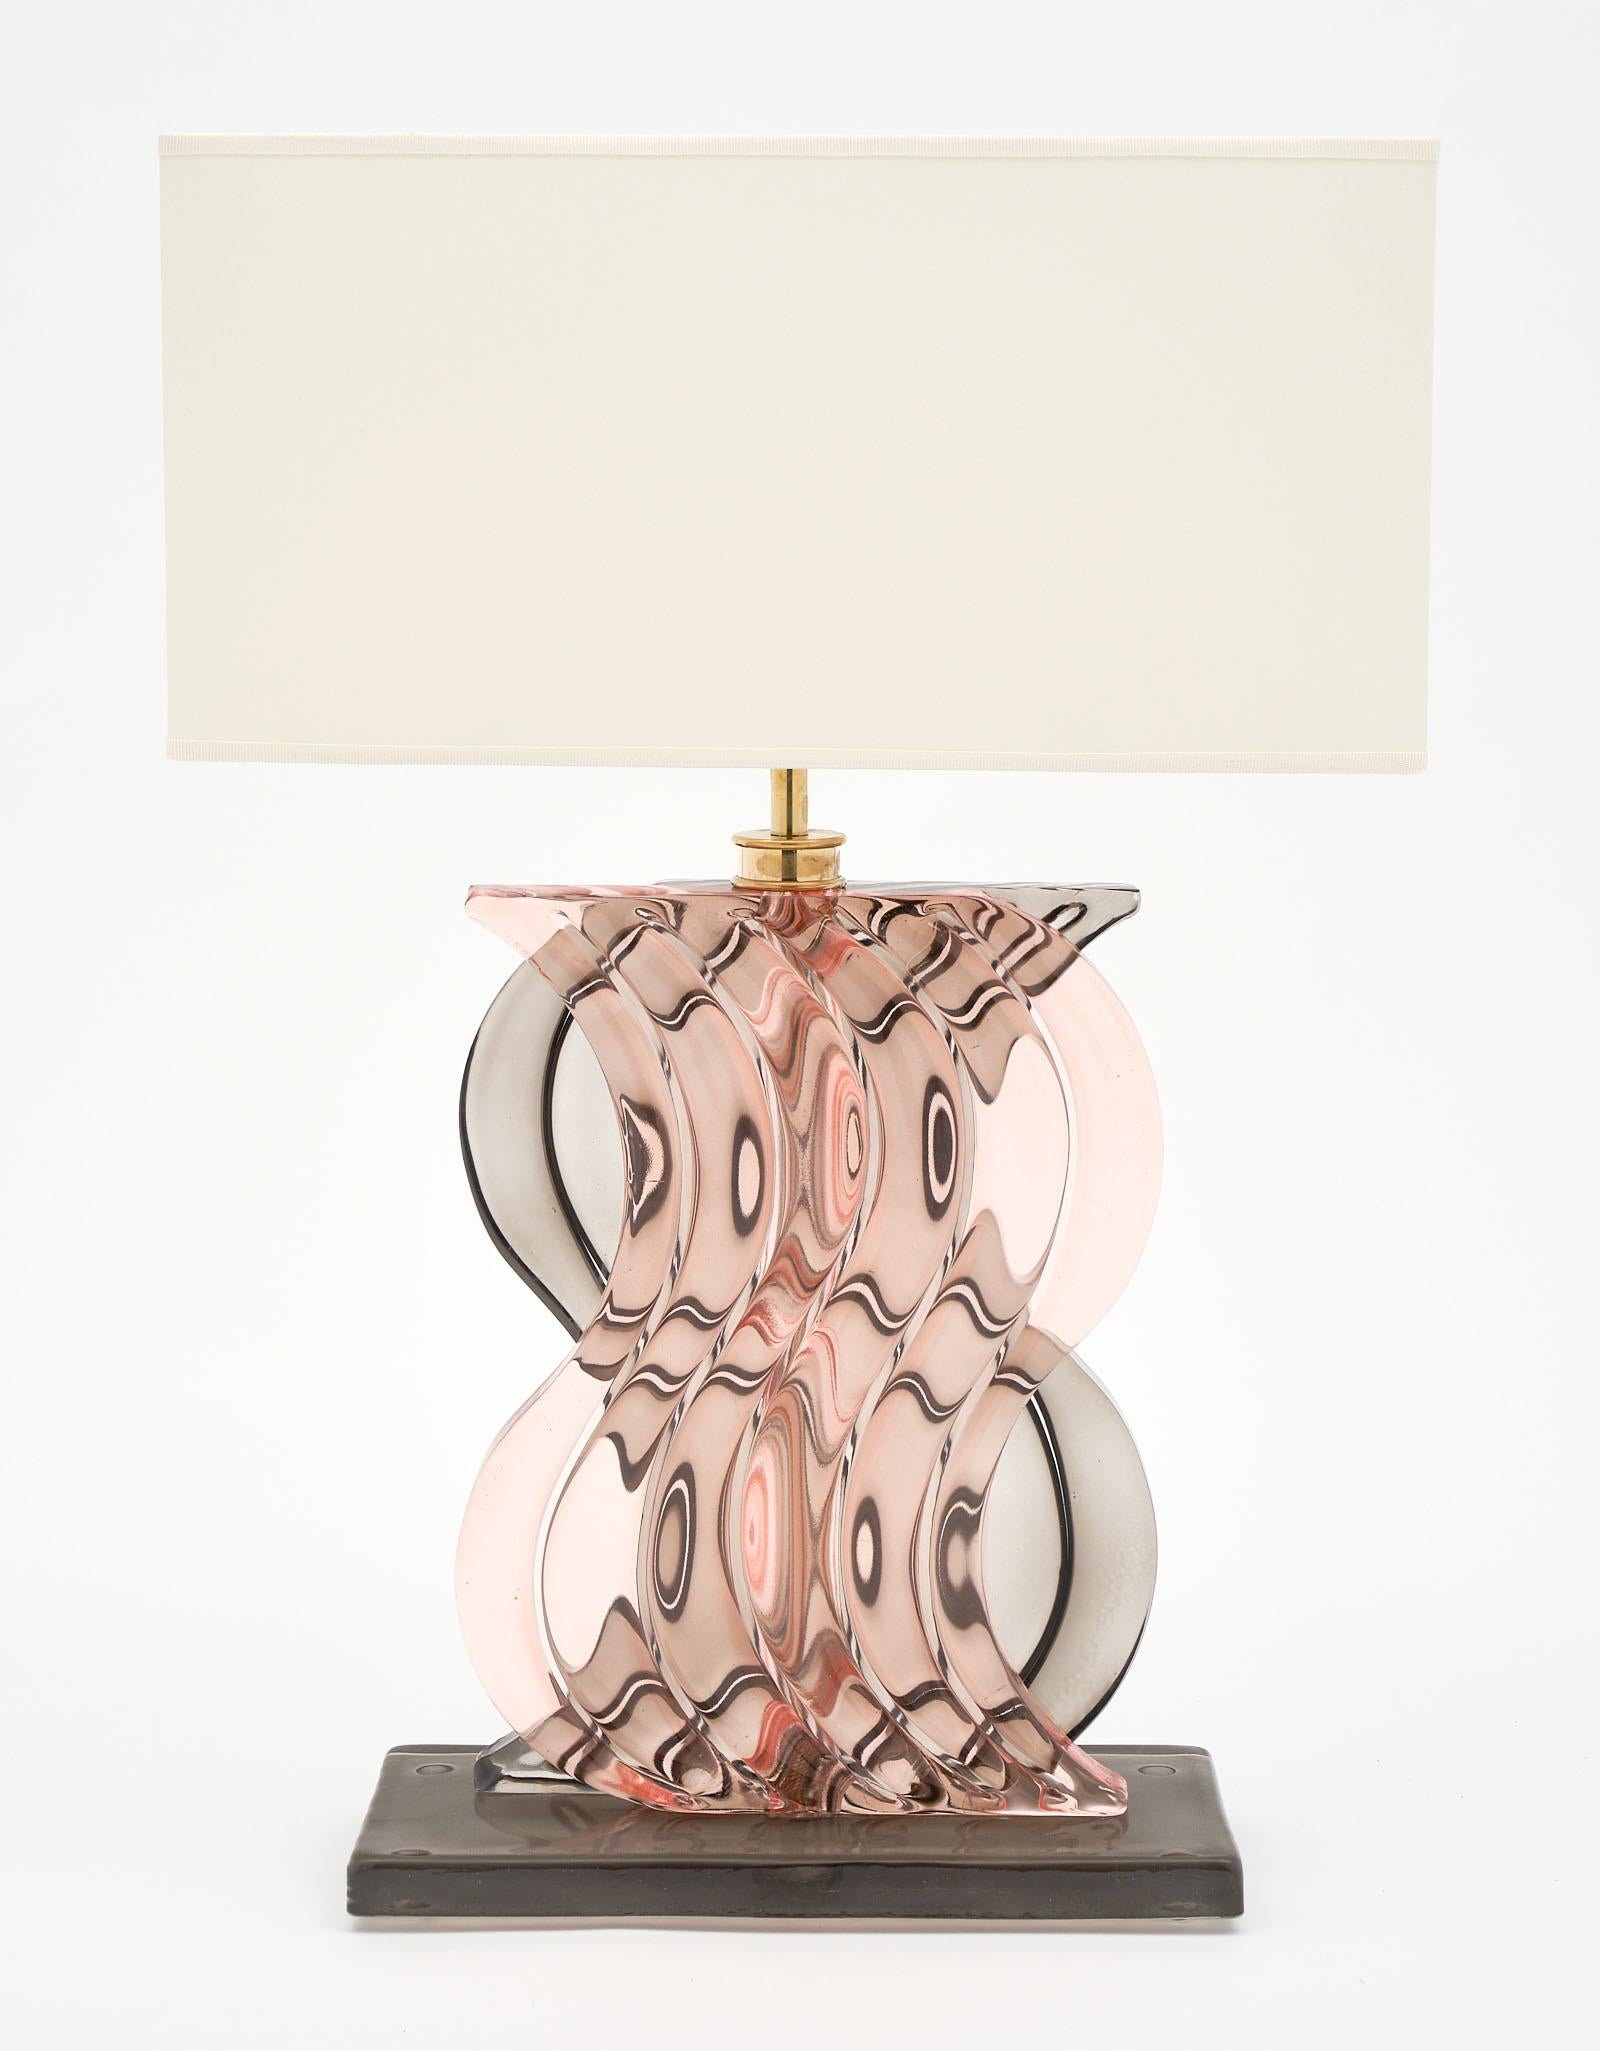 Murano glass ridged pink and gray lamps with beautiful curving glass elements layered for a striking effect. We love the contrast of the gray and powder pink hand blown translucent glass. They have been newly wired to fit US standards.

This pair is